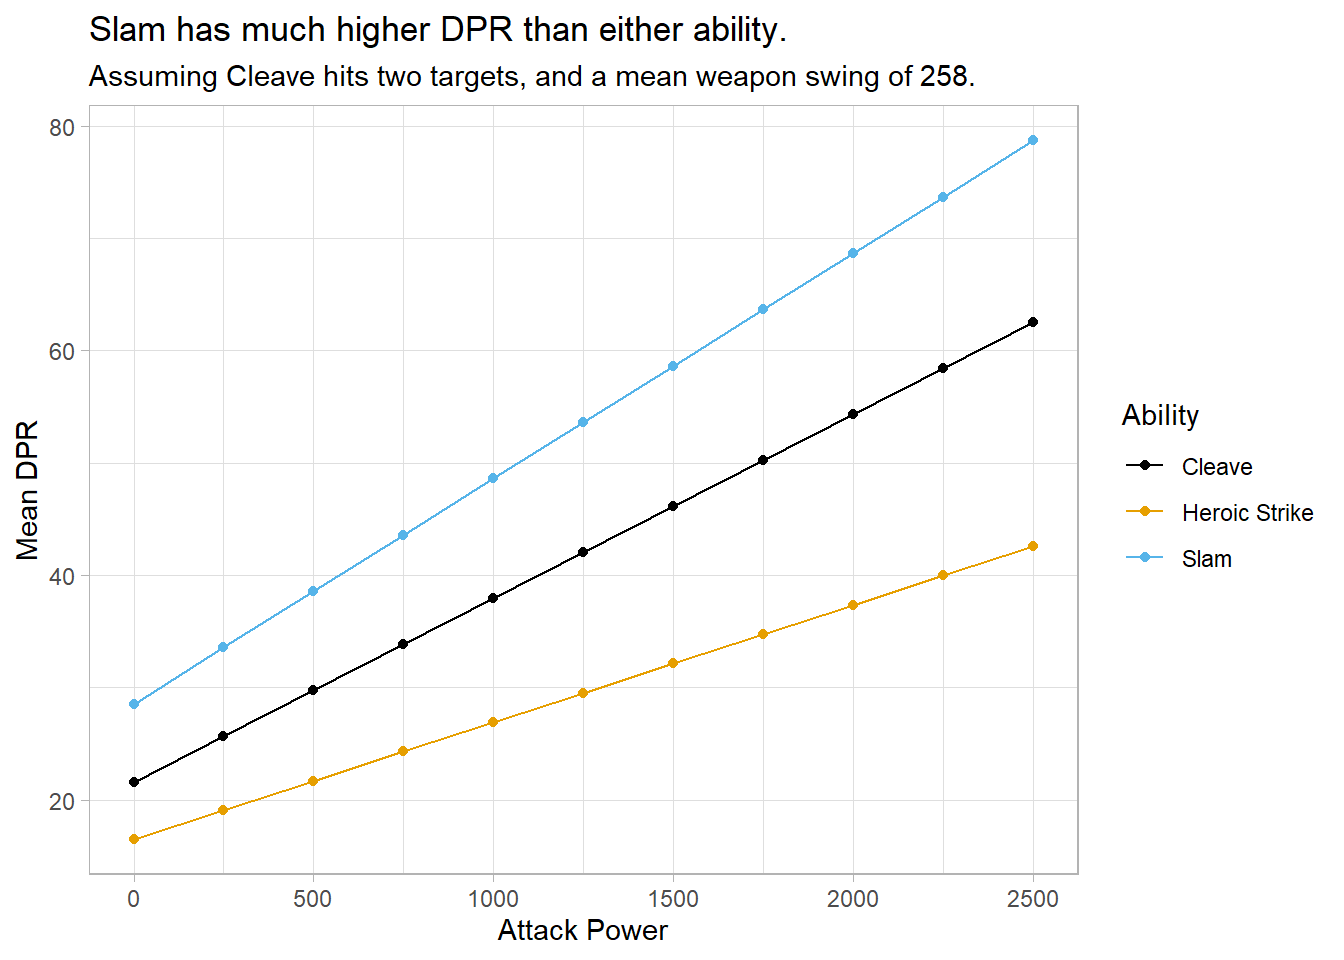 Comparison between Cleave, Heroic Strike, and Slam mean DPR at varying attack power levels.